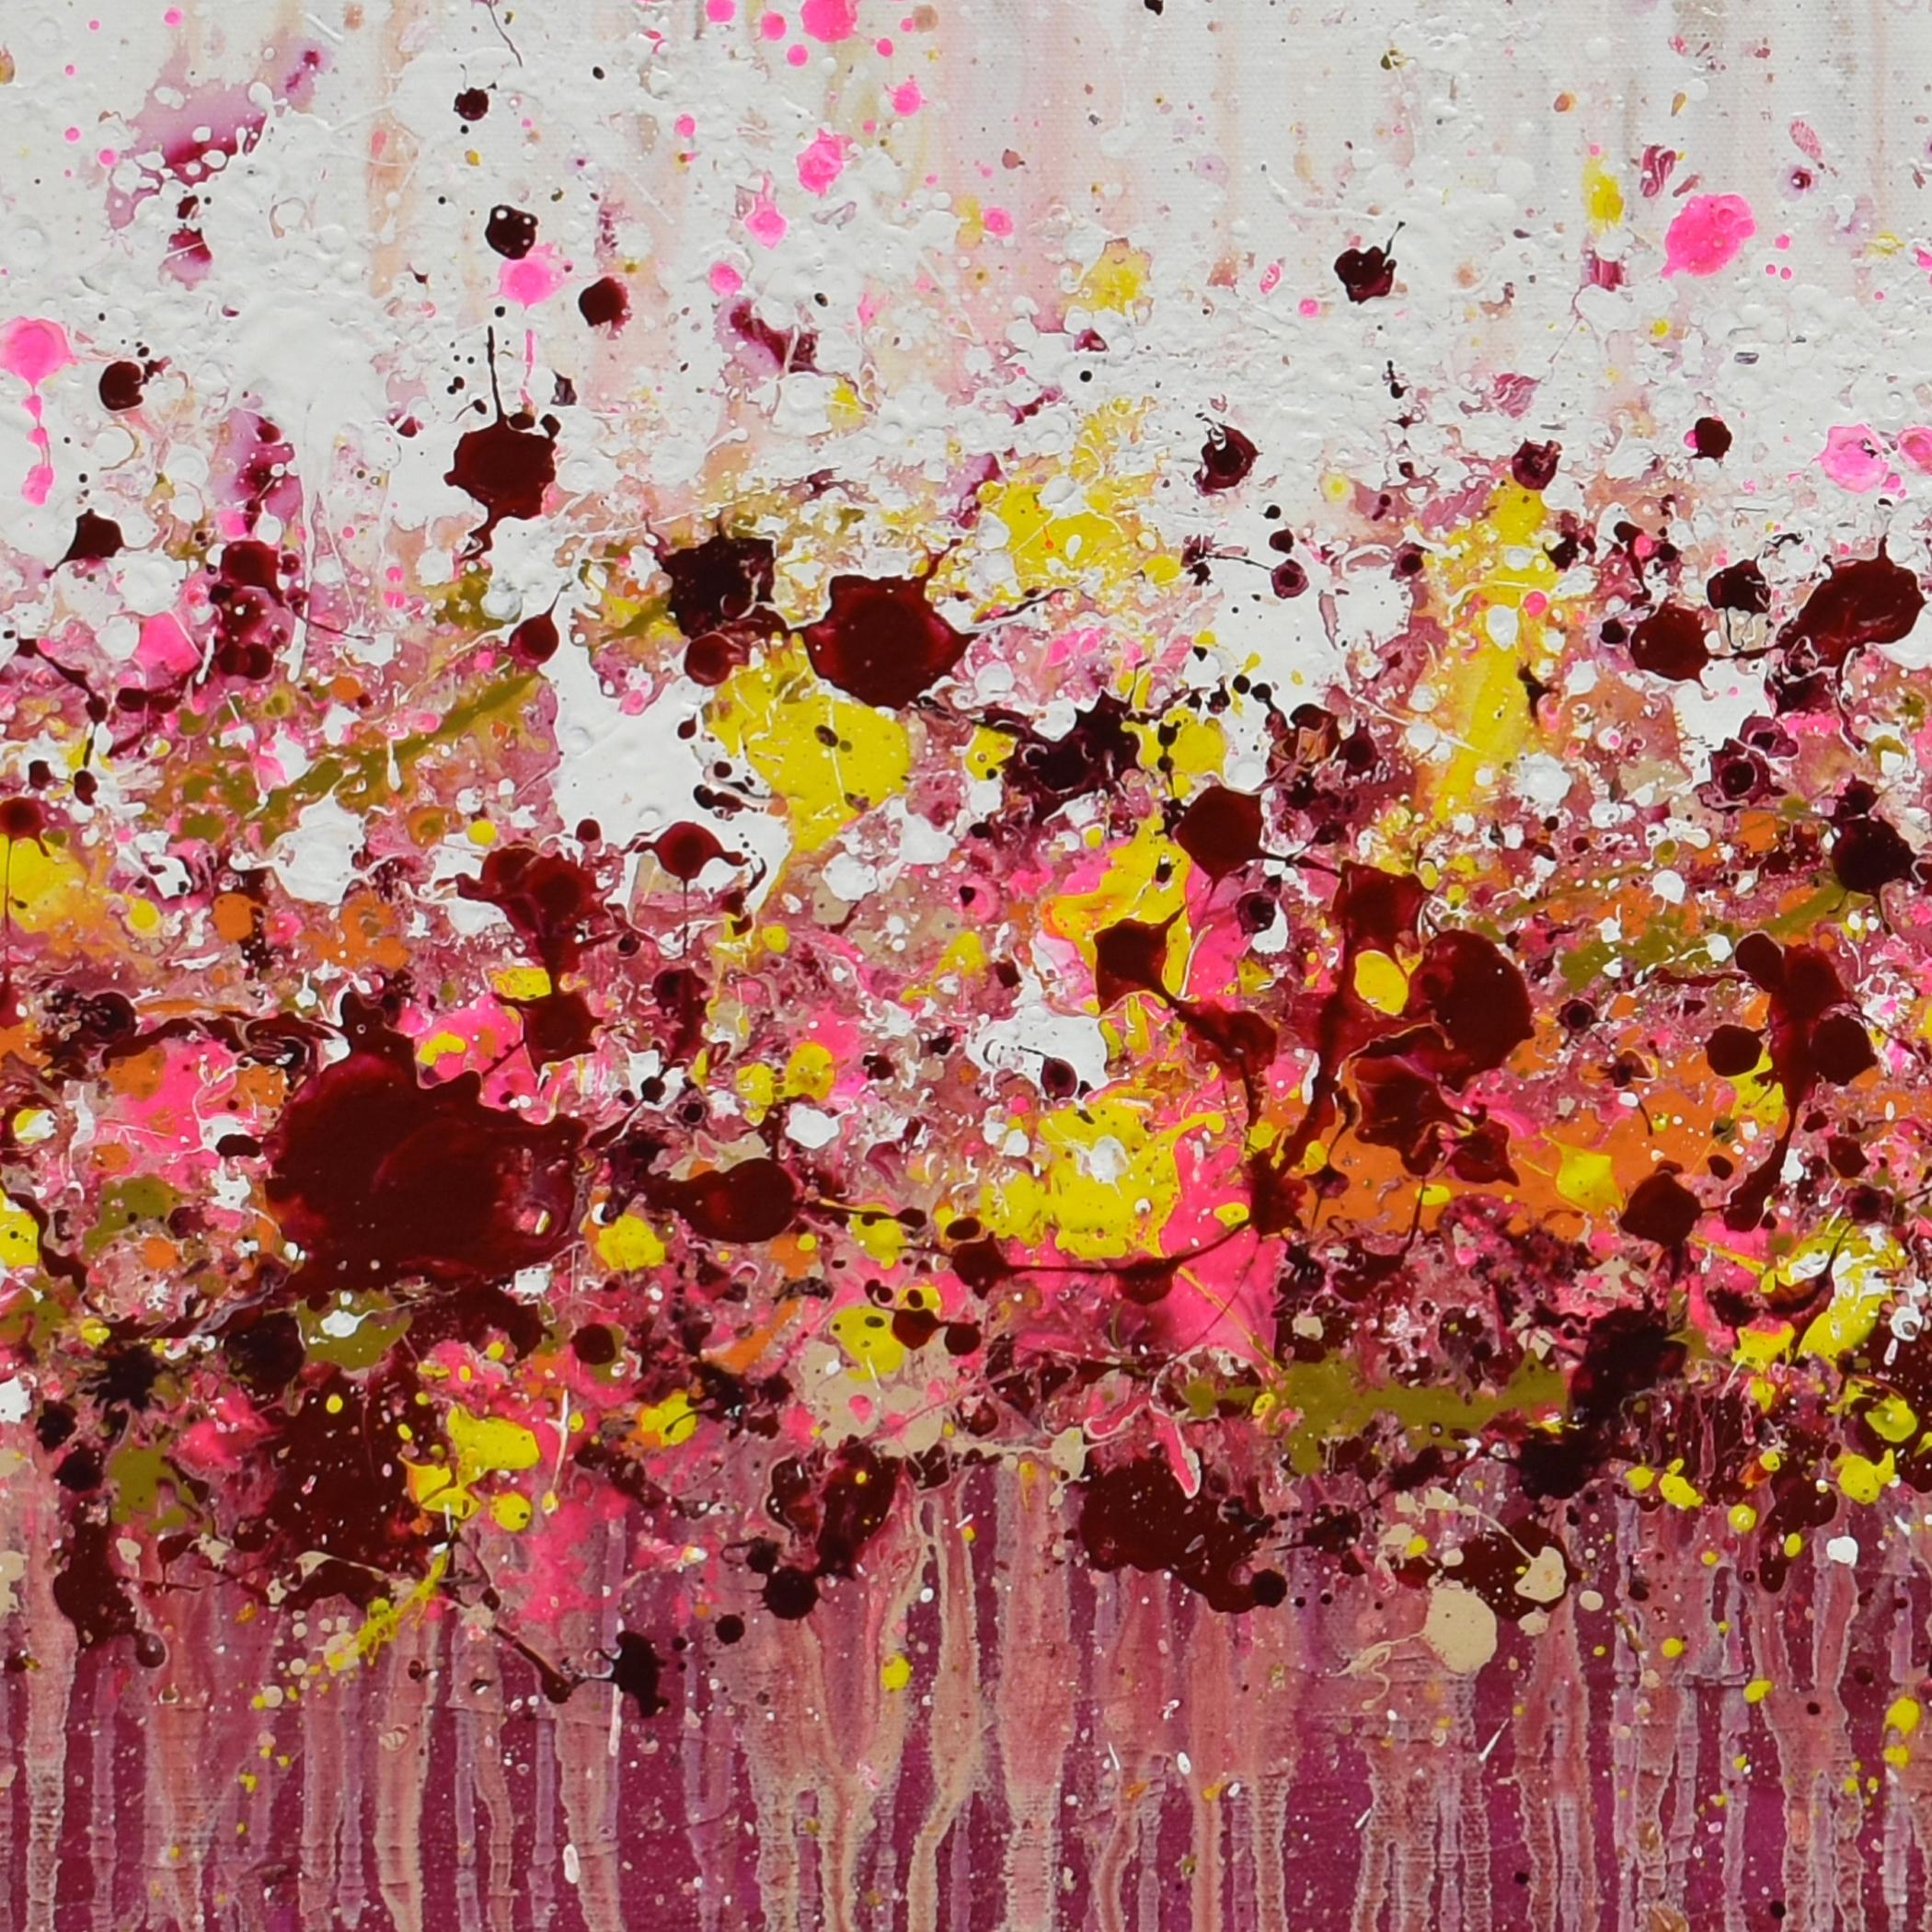 <p>Artist Comments<br>Part of artist Lisa Carney's signature GeoFlora series. A collection of abstracted botanical paintings where she uses drip and splash techniques to suggest plant life, like wildflower fields and sea corals. This piece features